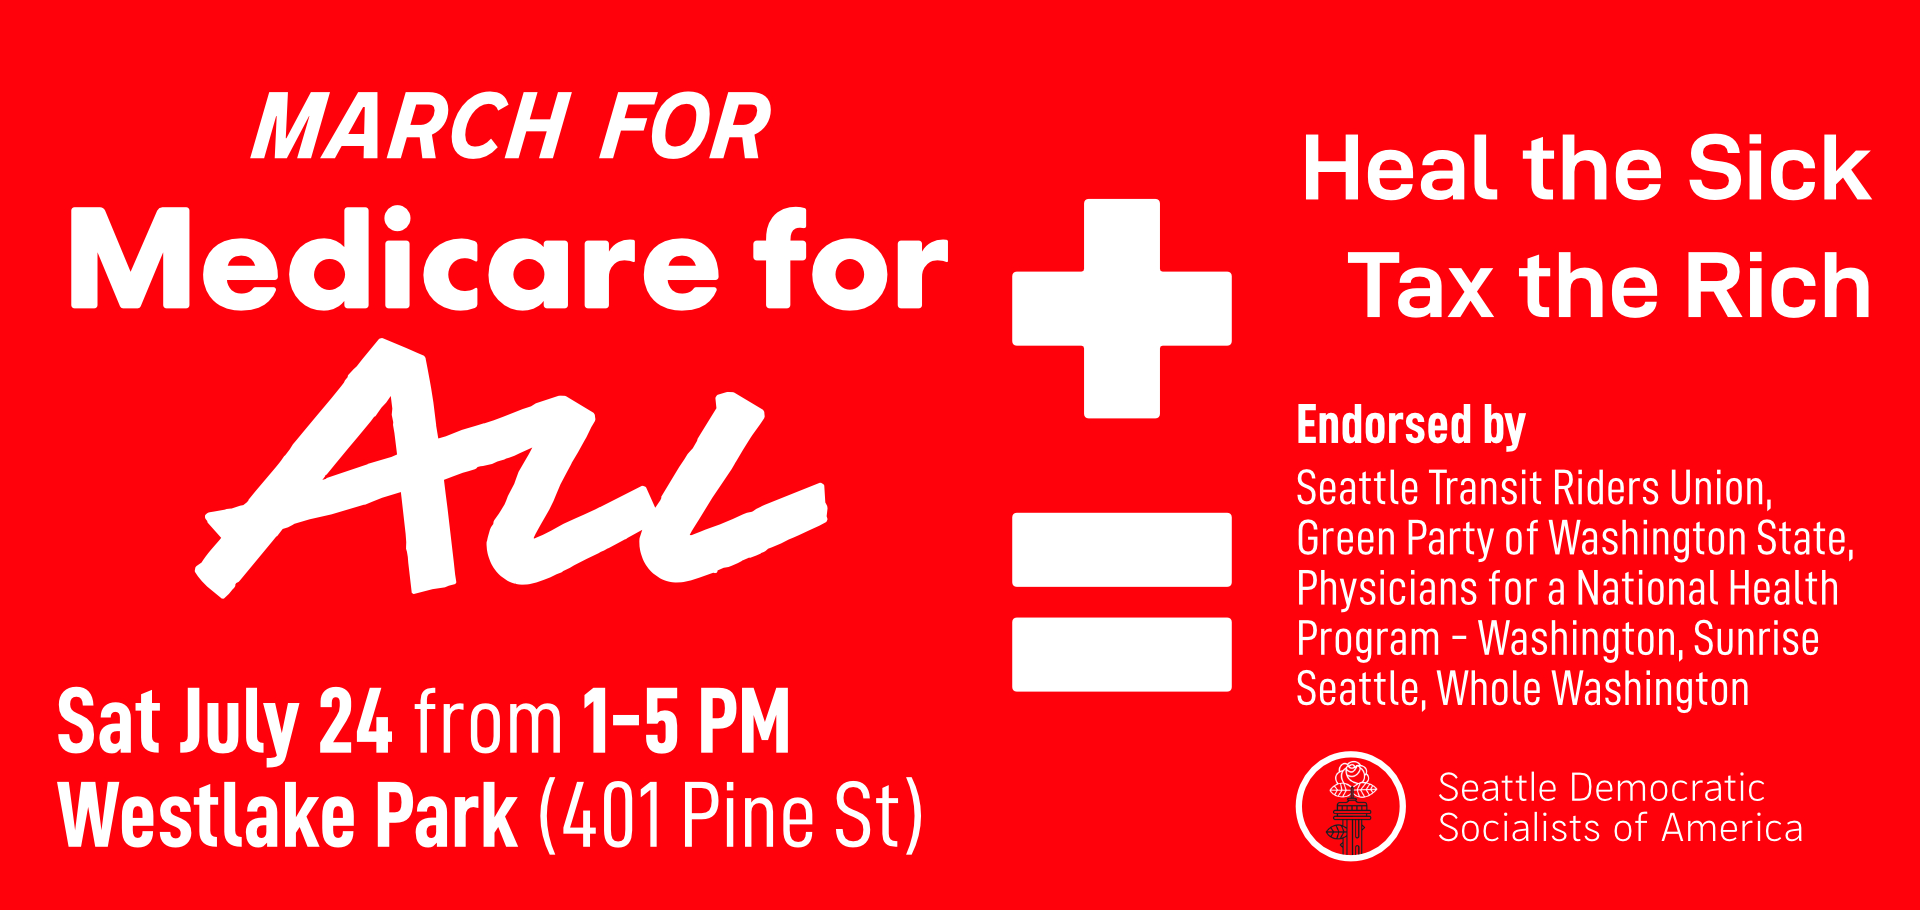 Alt Text: March for Medicare for All in white text, next to event details described in table row. Heal the Sick Tax the rich sit next to symbols of + and = (for health and equality). Seattle DSA Logo in lower right corner on red background.